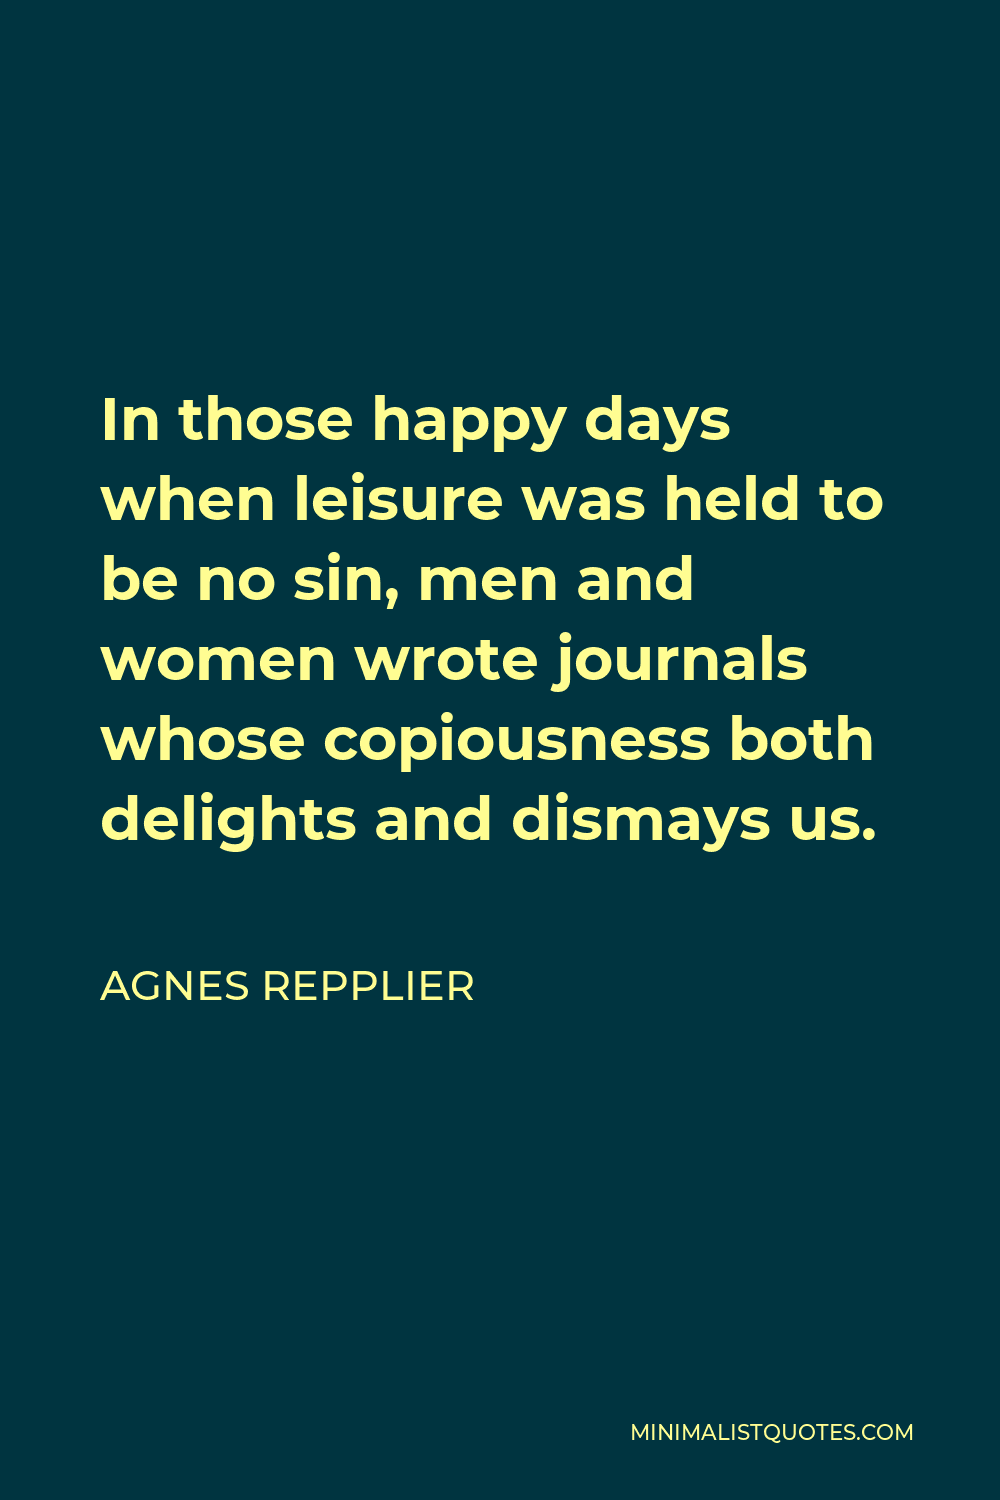 Agnes Repplier Quote - In those happy days when leisure was held to be no sin, men and women wrote journals whose copiousness both delights and dismays us.